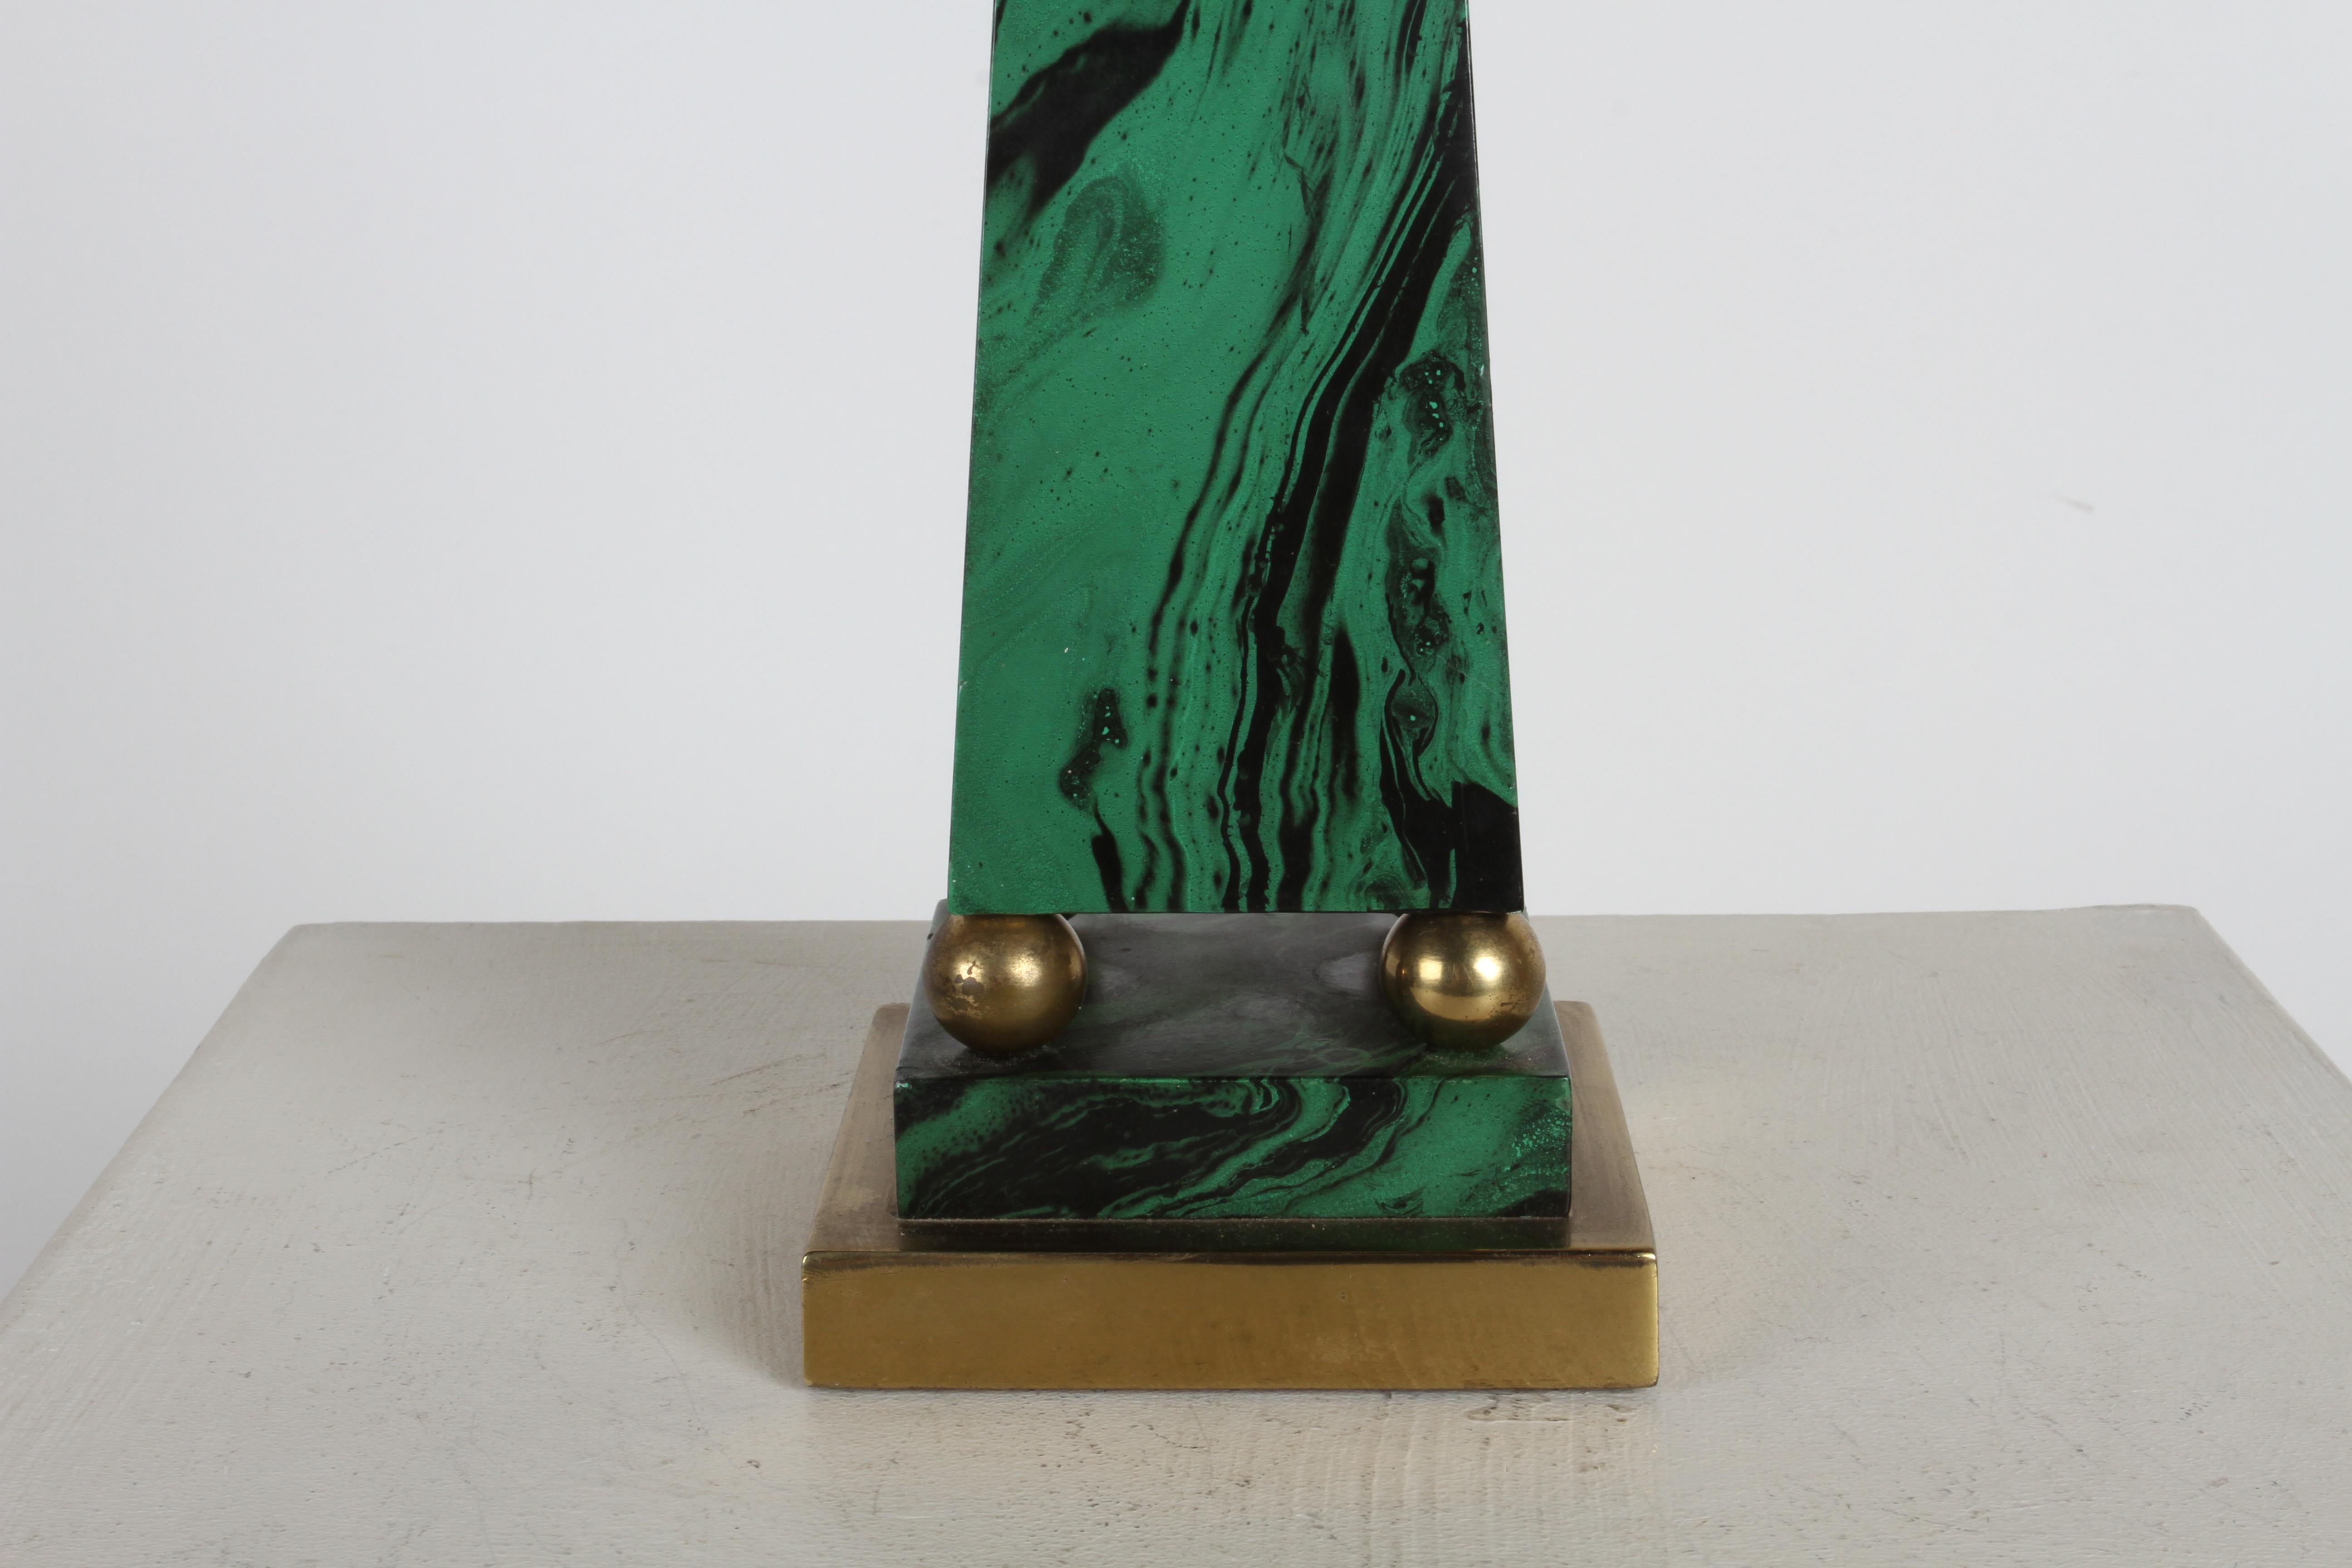 1970s  Hollywood Regency or Egyptian Revival faux painted malachite & brass decorative obelisk. Possibly by Chapman style or in the style of Maitland Smith.  n fine condition, few touch ups to paint, minor patina to brass. 